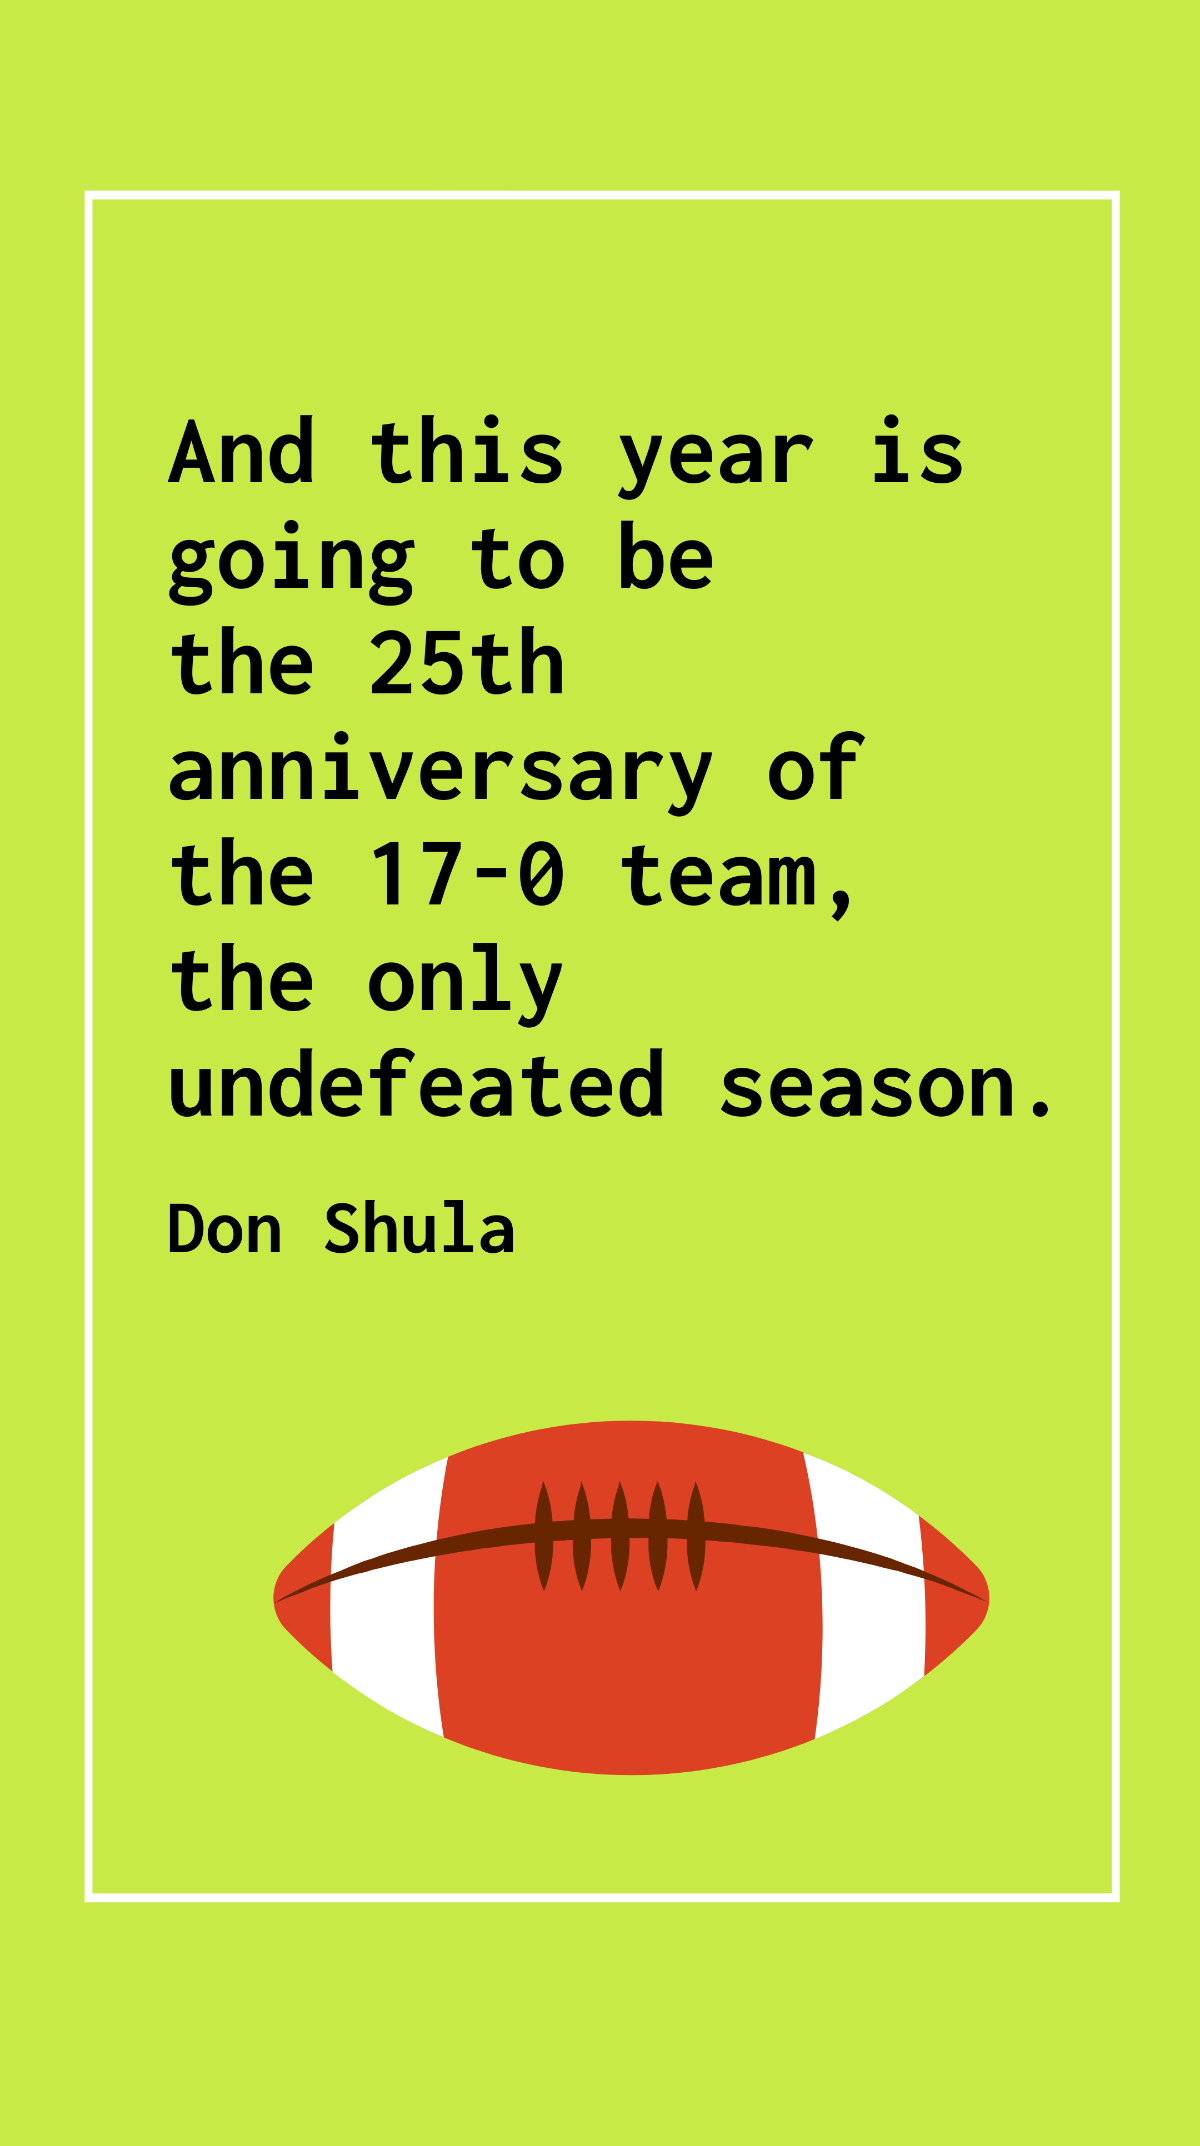 Don Shula - And this year is going to be the 25th anniversary of the 17-0 team, the only undefeated season. Template